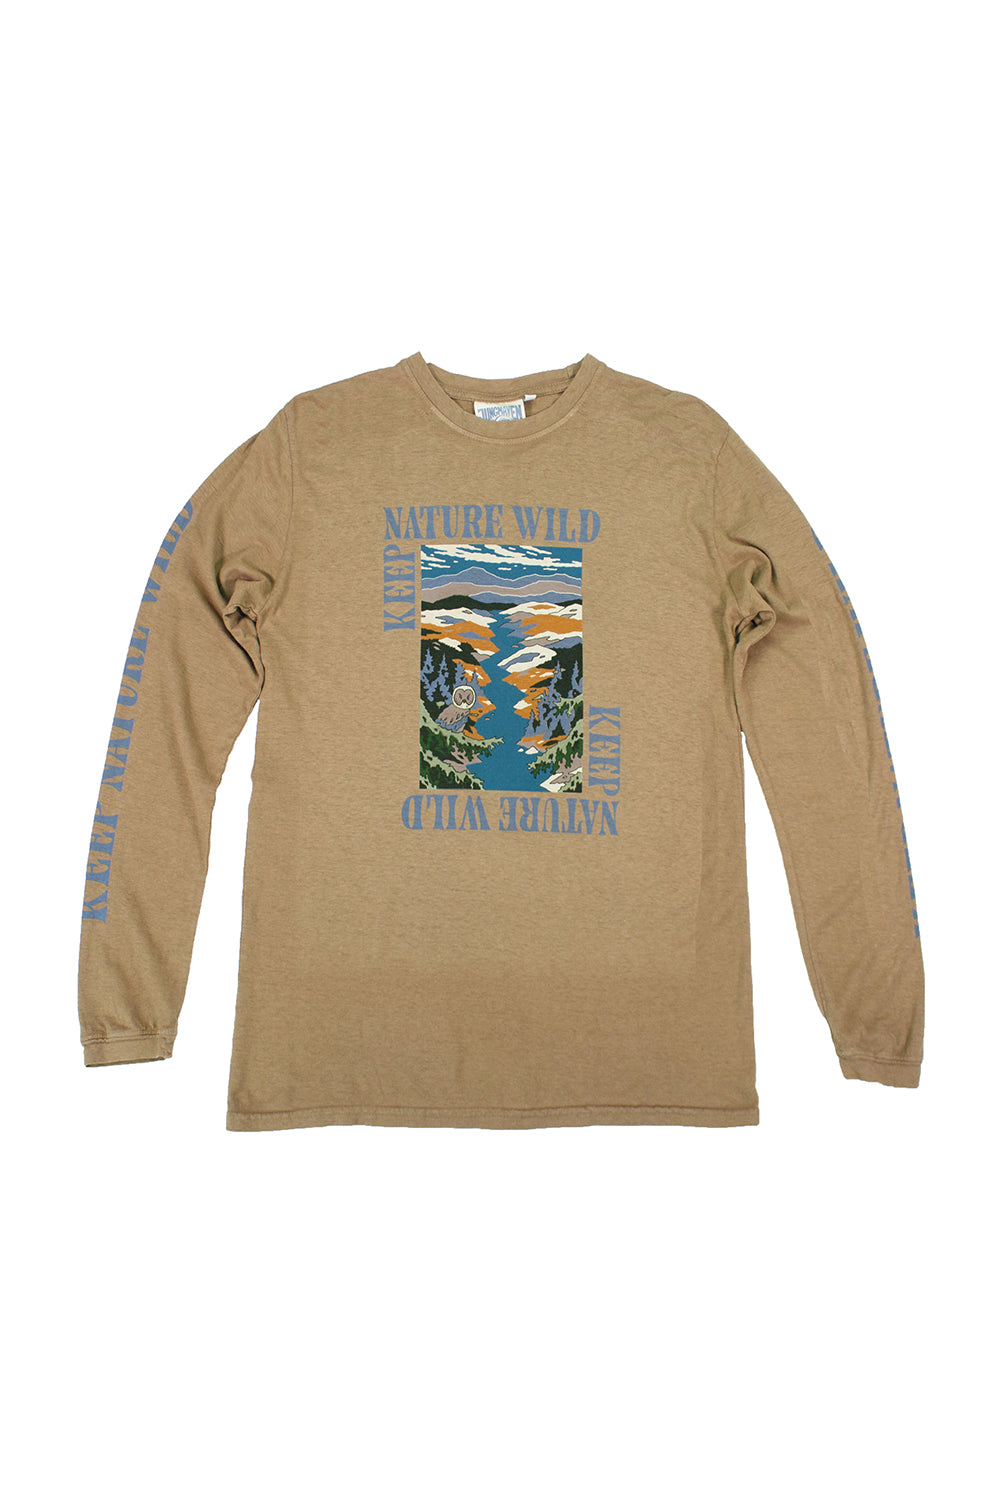 Keep Nature Wild Jung Long Sleeve Tee | Jungmaven Hemp Clothing & Accessories / Color: Coyote